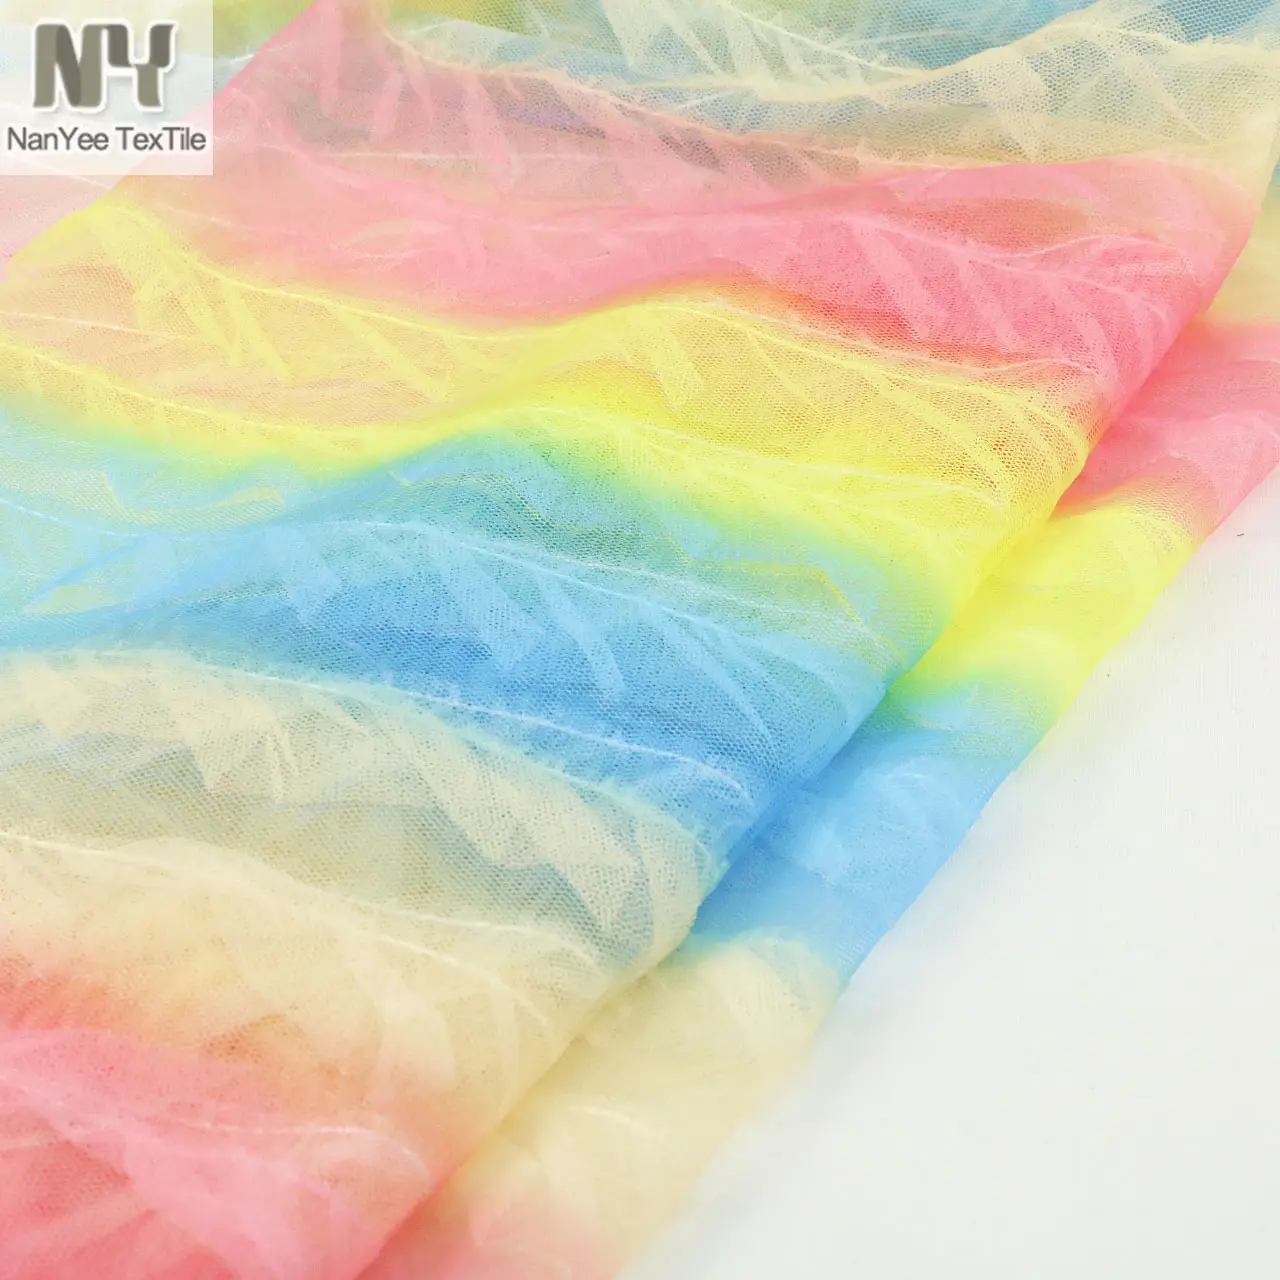 Nanyee Textile Multi Layered 3D Crochet With Embroidery Rainbow Printed Mesh Fabric